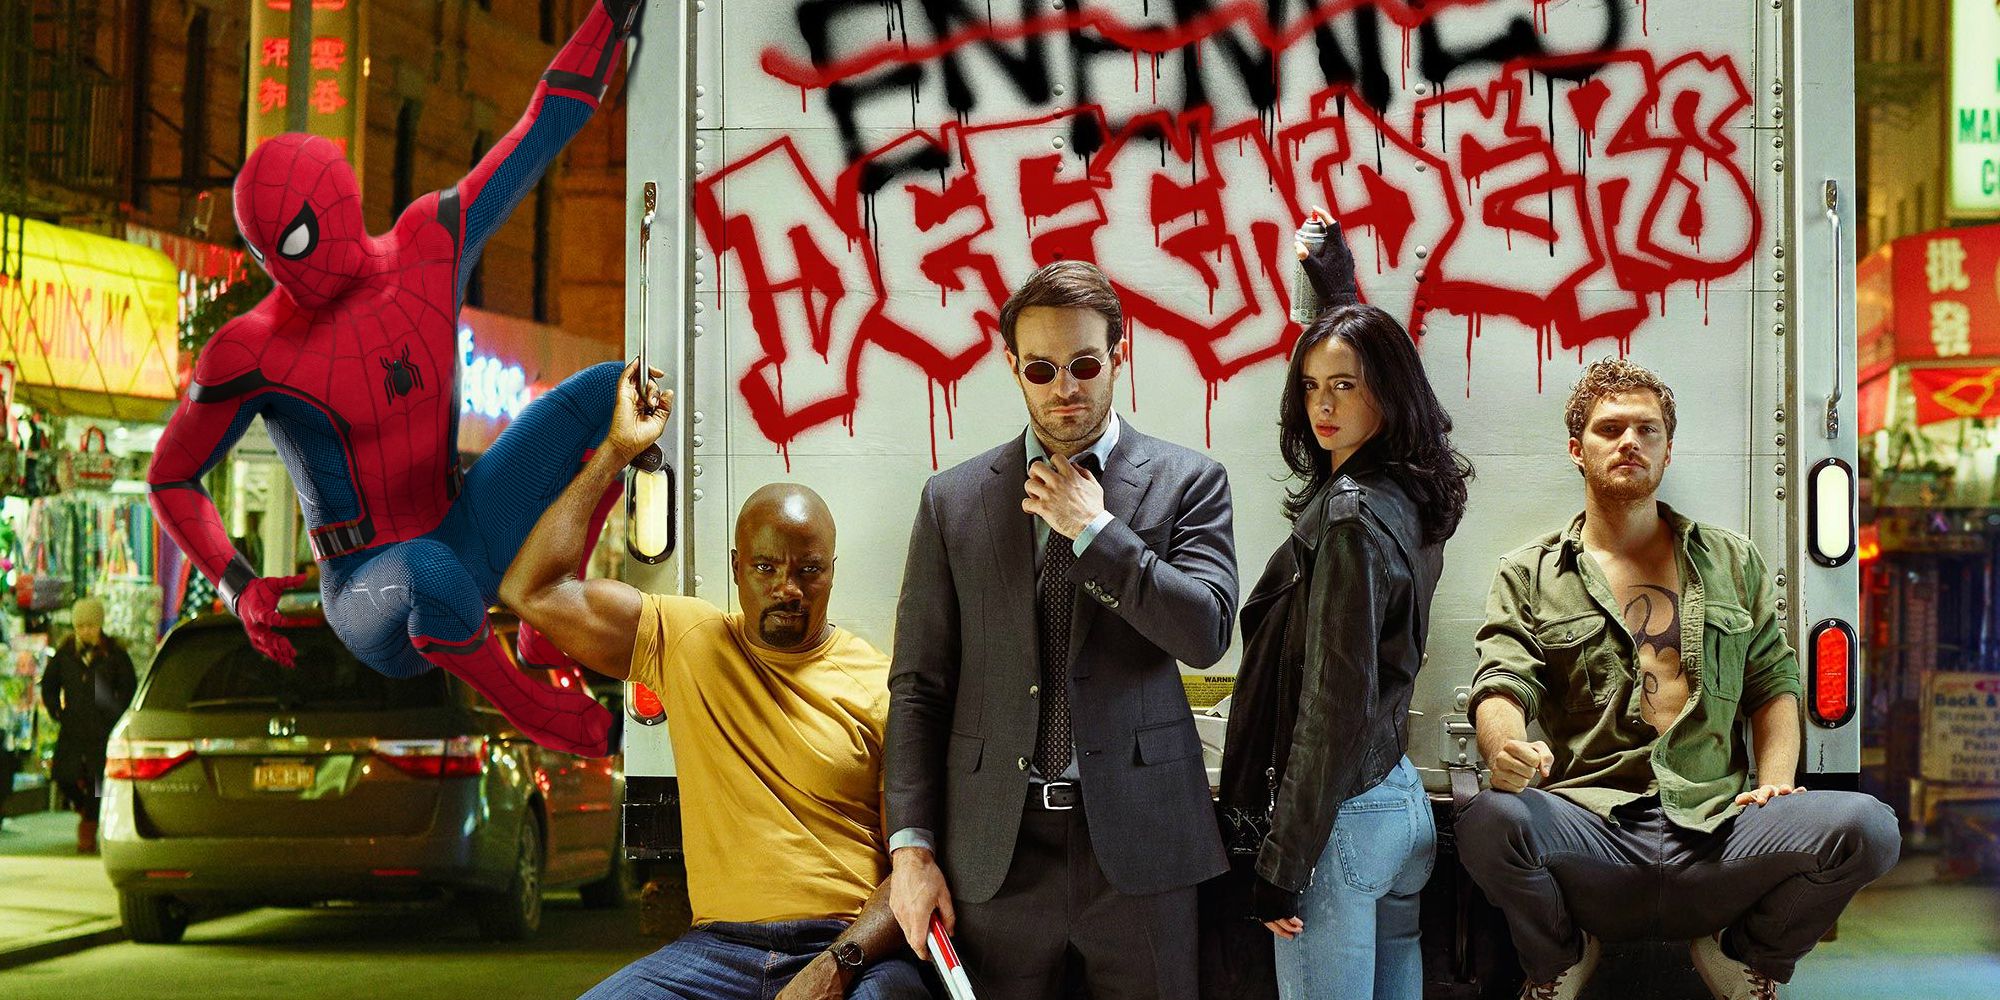 An image of Spider-Man hanging on a wall and the Defenders standing behind a truck 